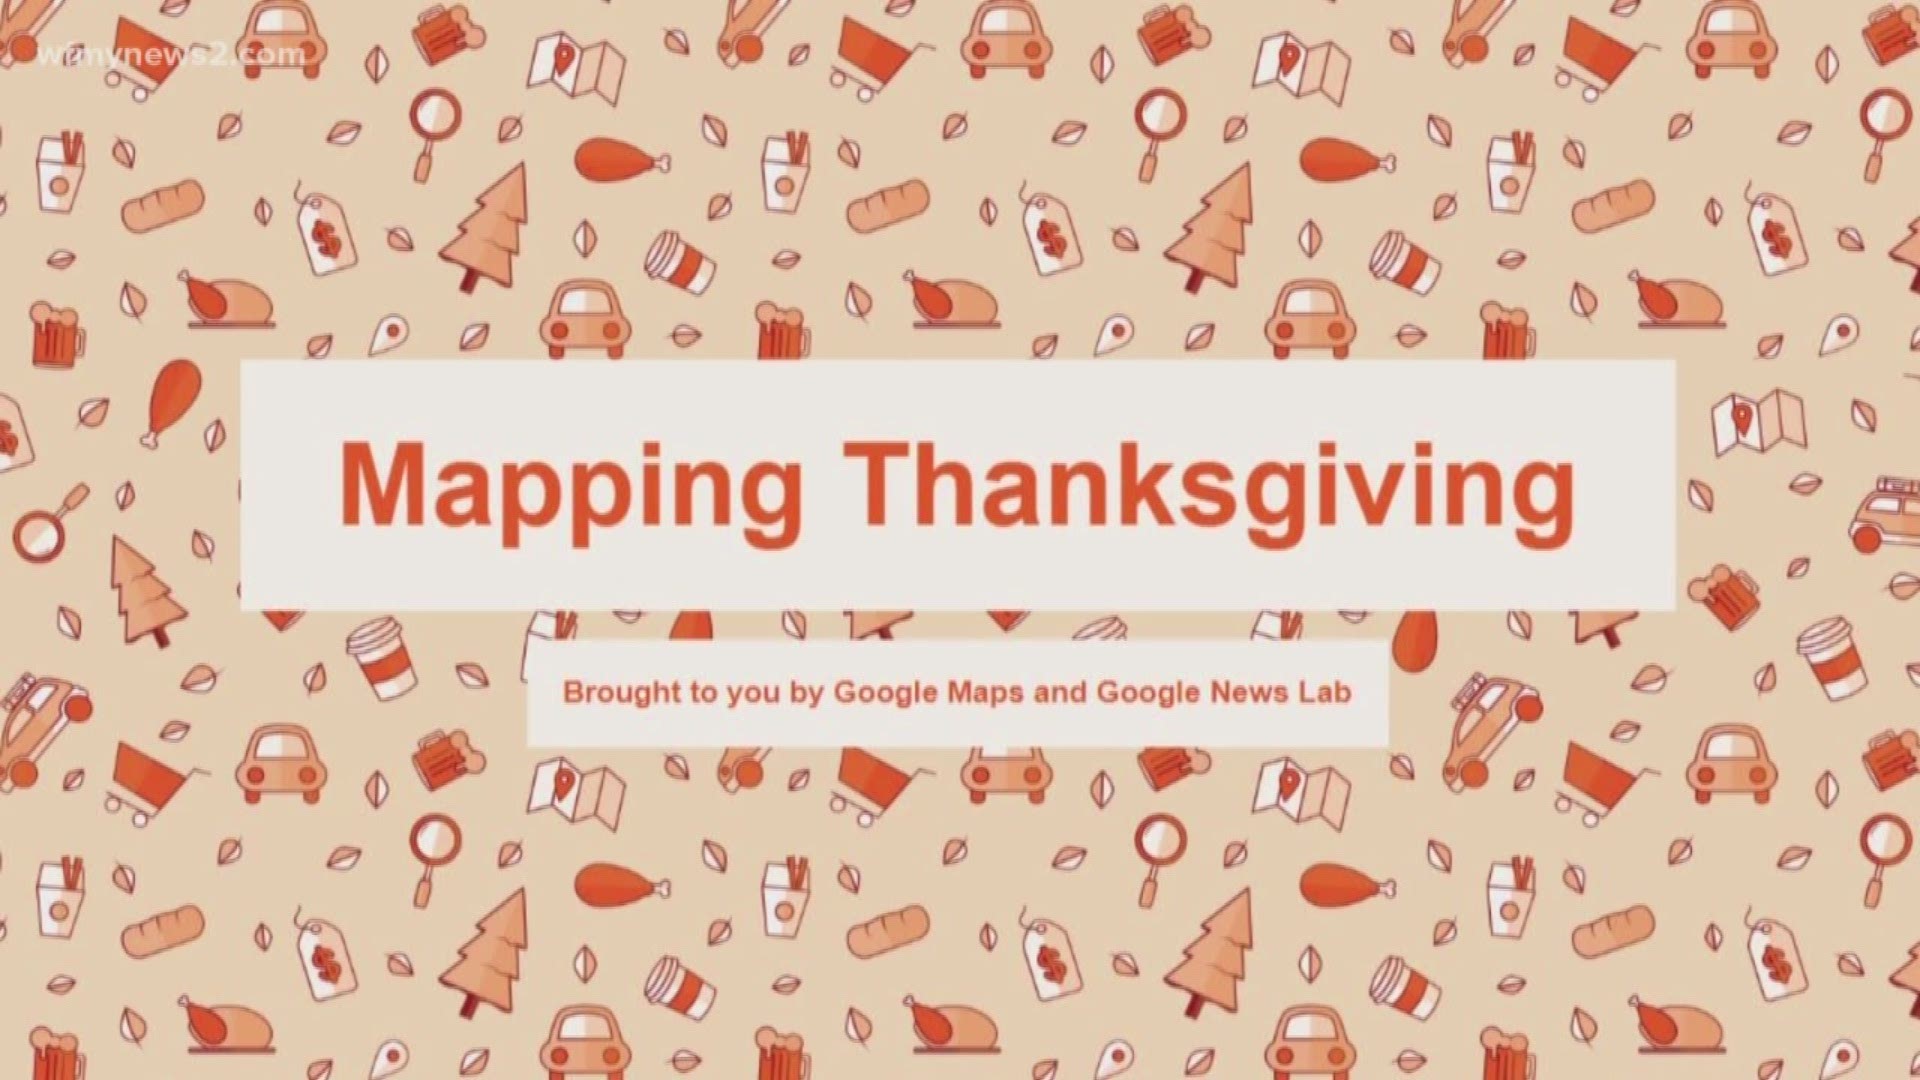 Google Maps collected data on when roads are the worst during thanksgiving weekend.